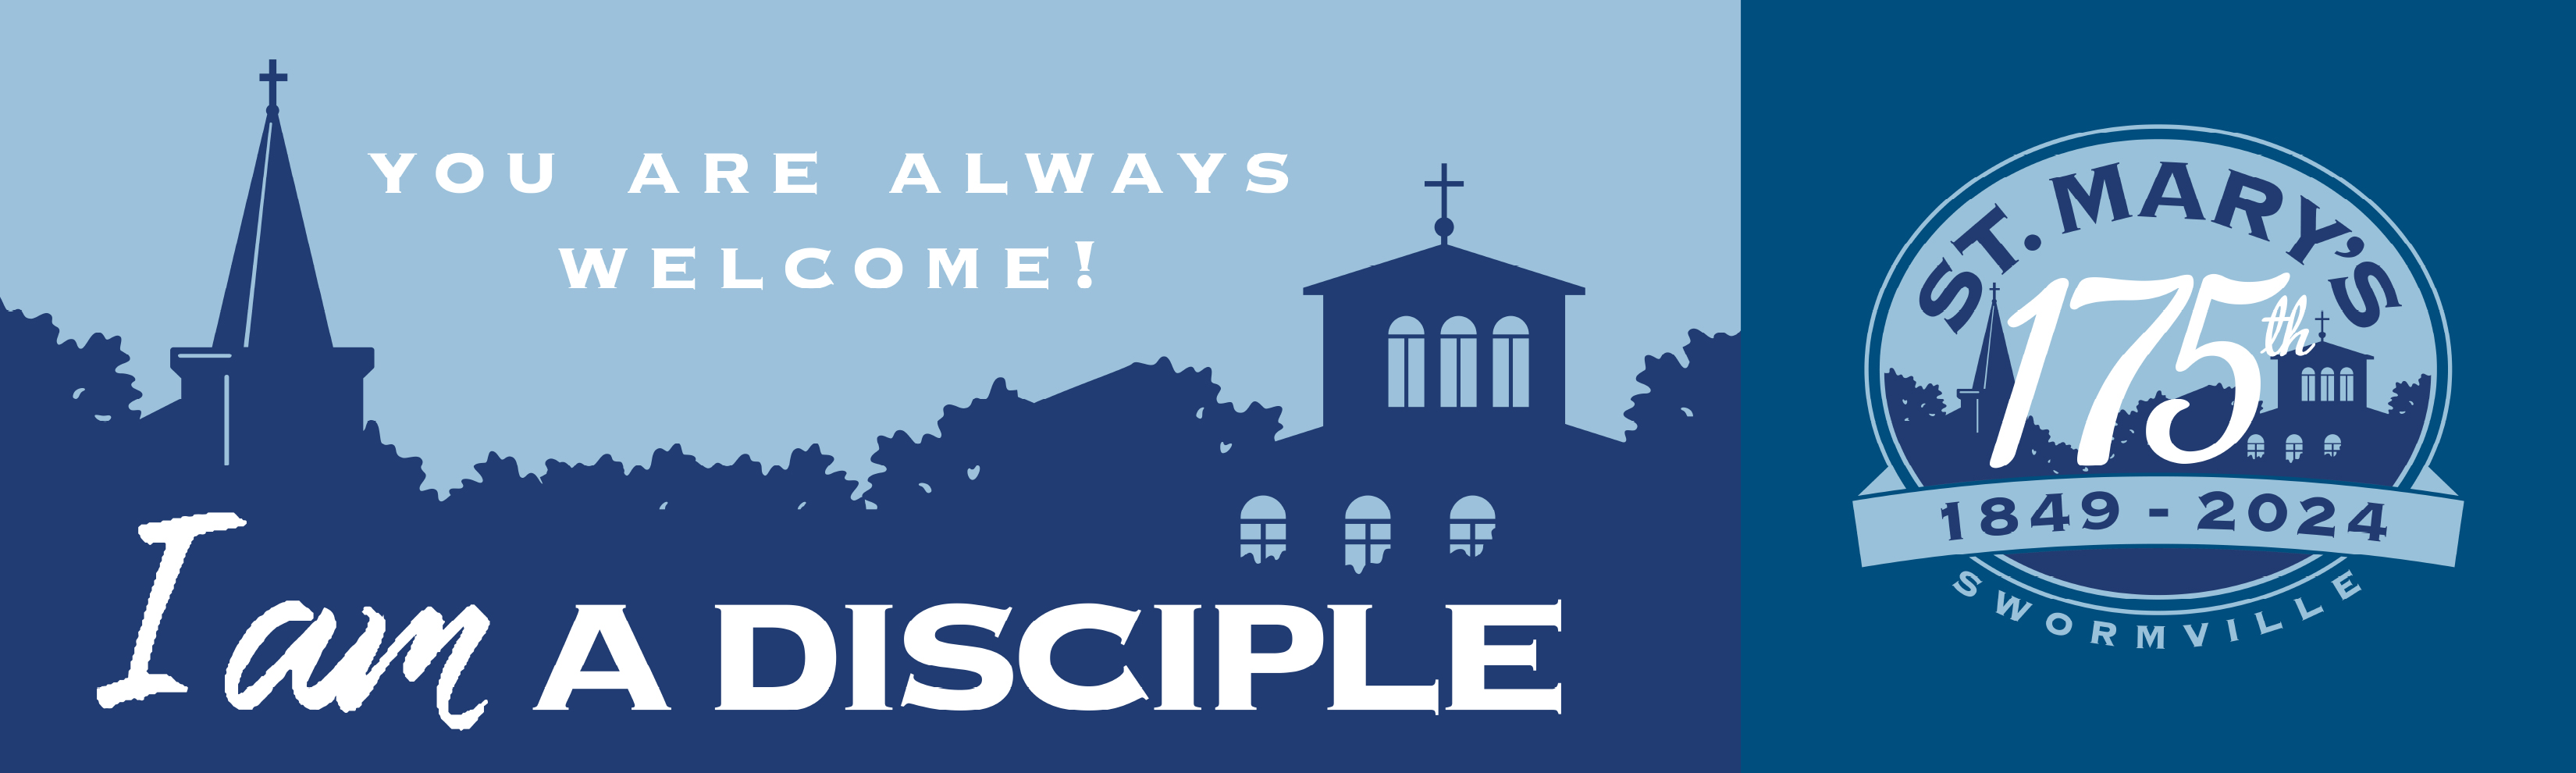 "I am a disciple" on blue building artwork of churches